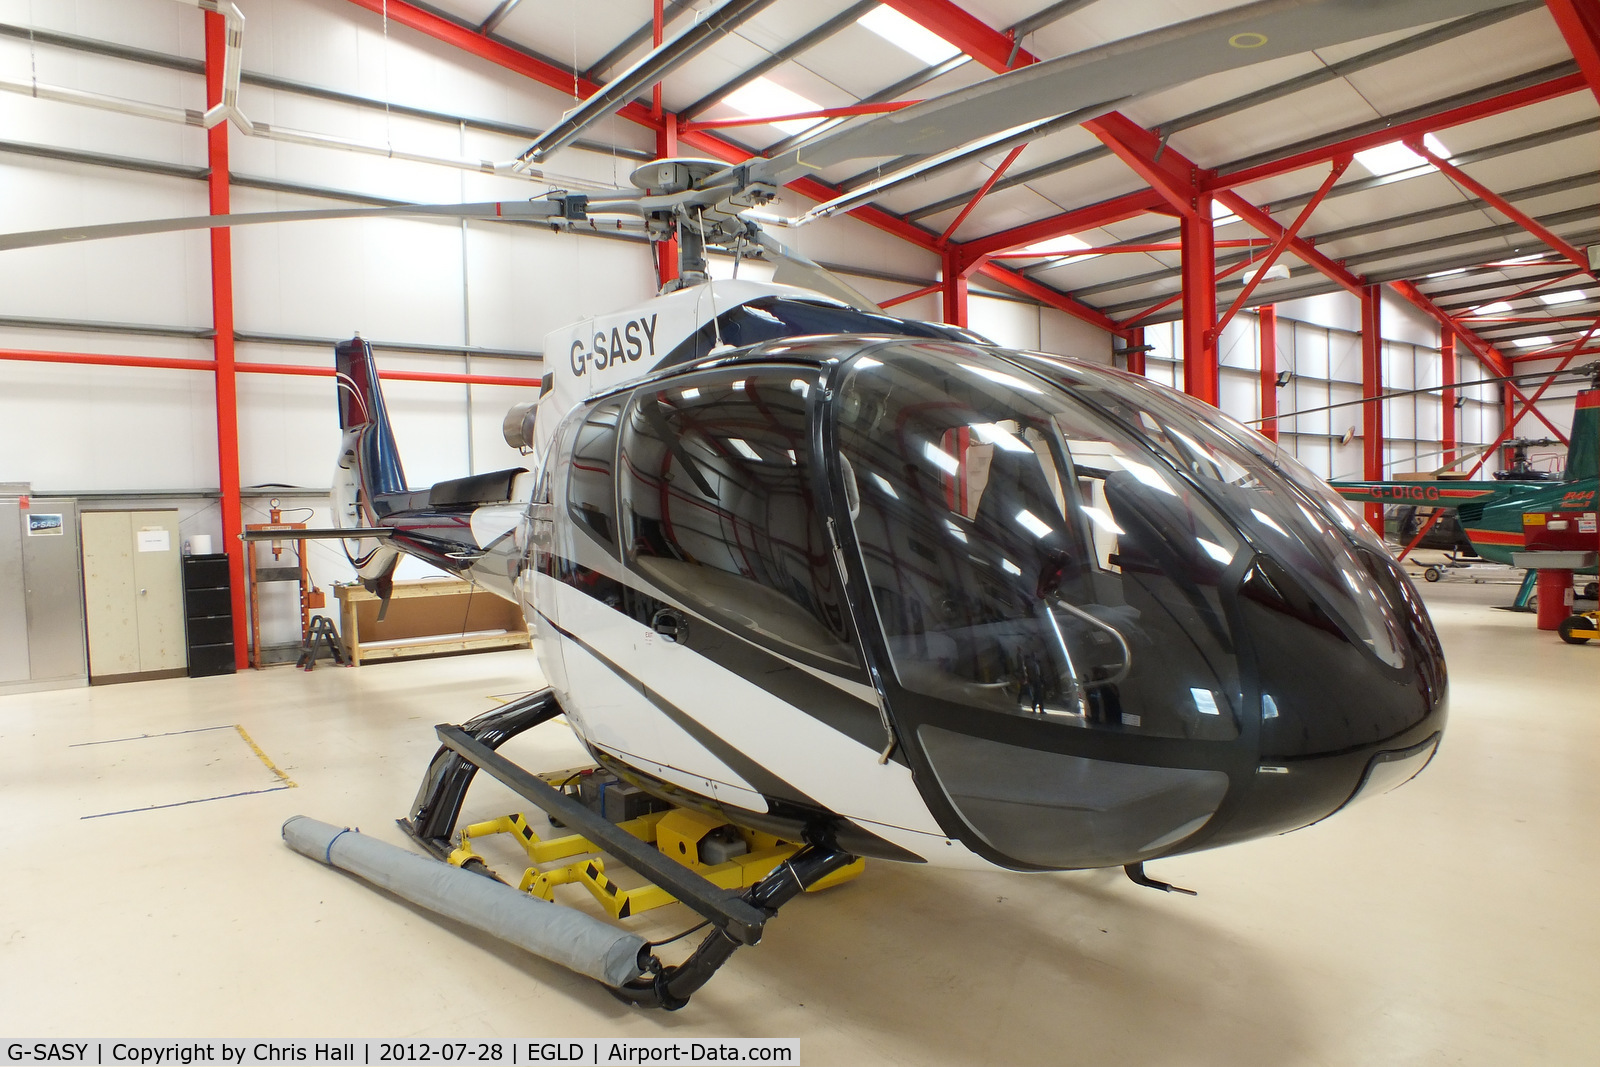 G-SASY, 2009 Eurocopter EC-130B-4 (AS-350B-4) C/N 4760, privately owned